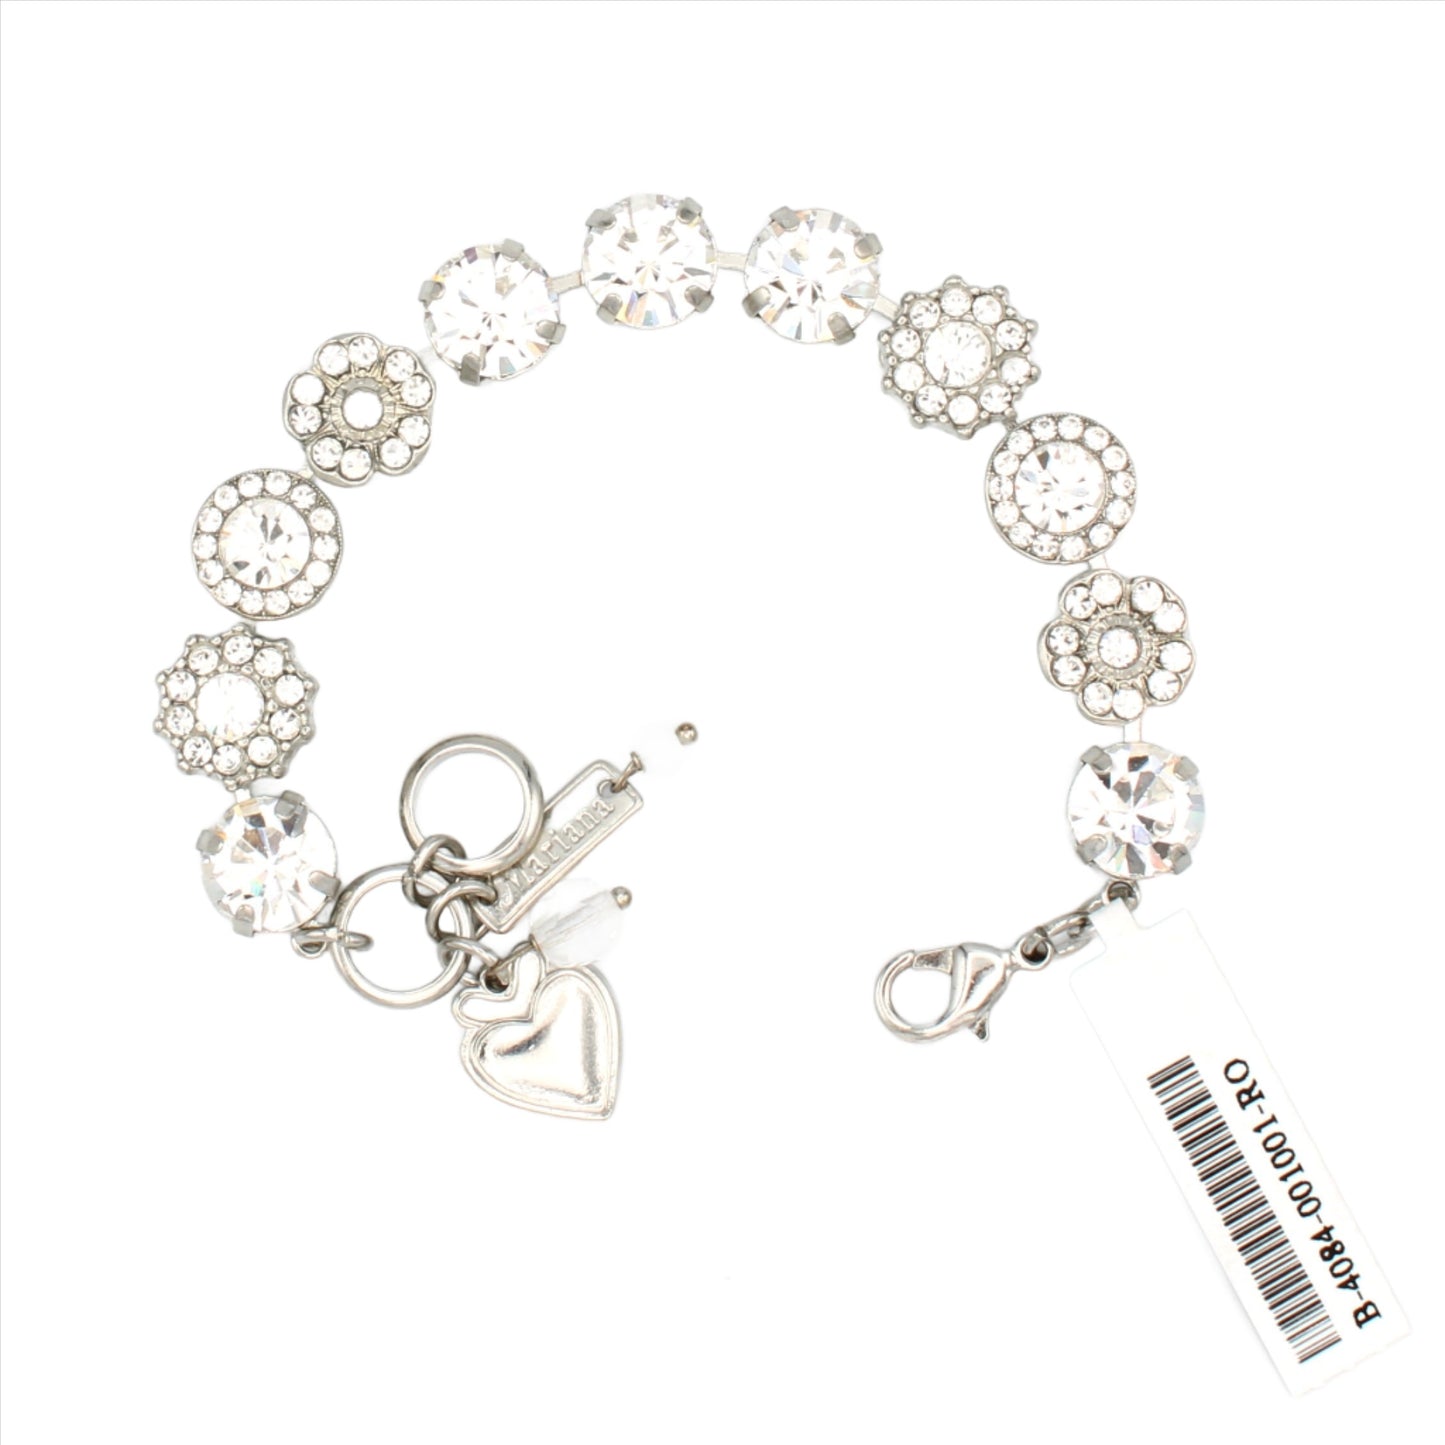 Clear Day Collection Large Rosette Bracelet